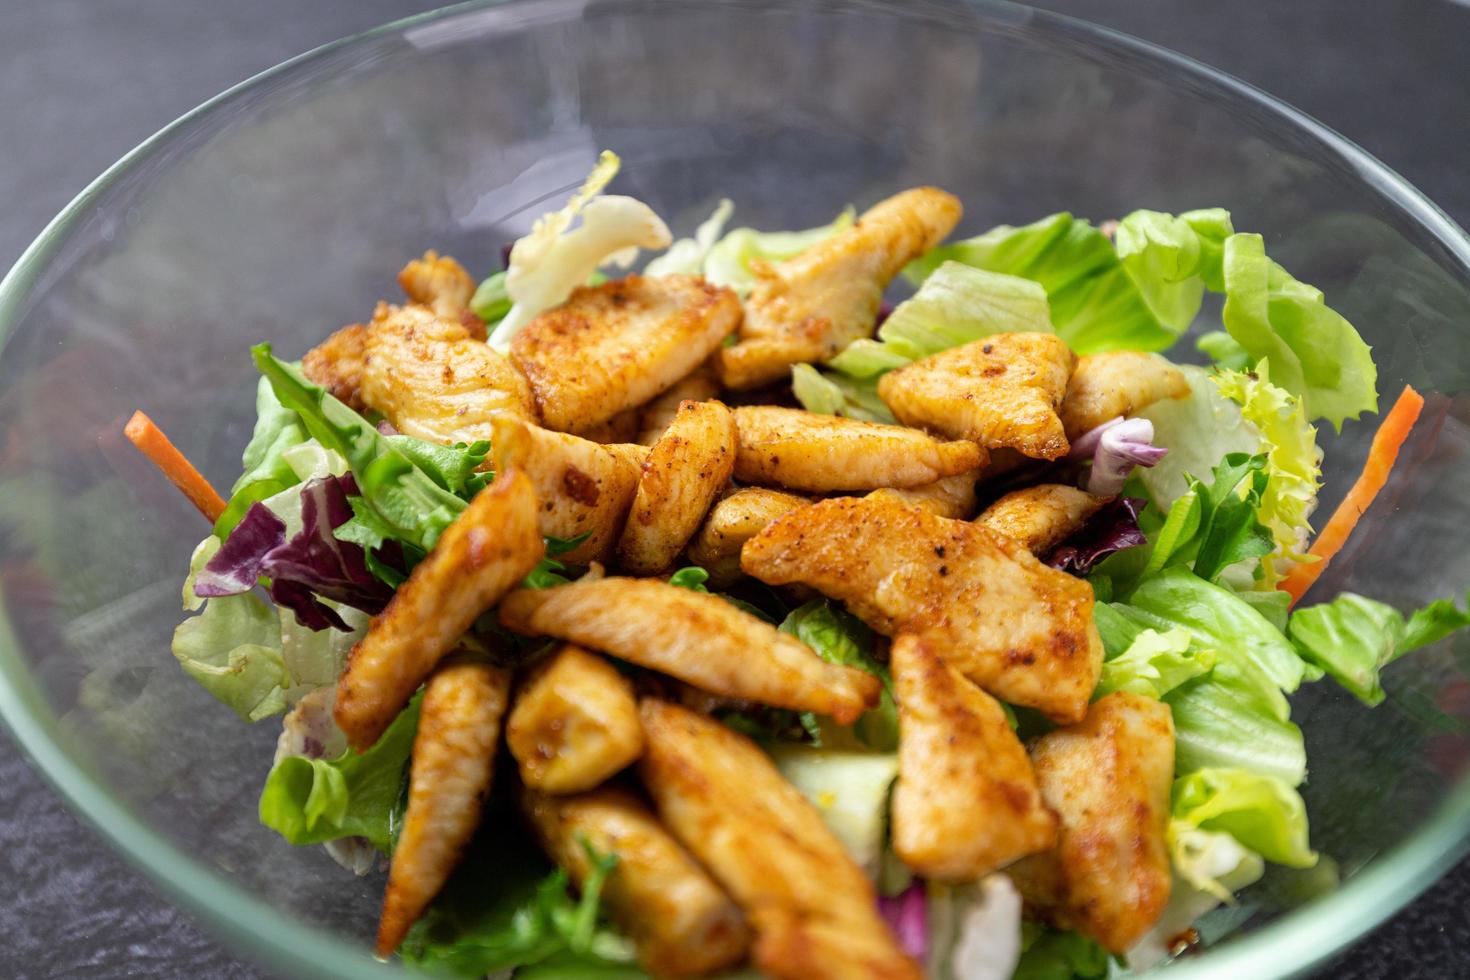 Dietary salad with chicken and lettuce in a glass dish. photo